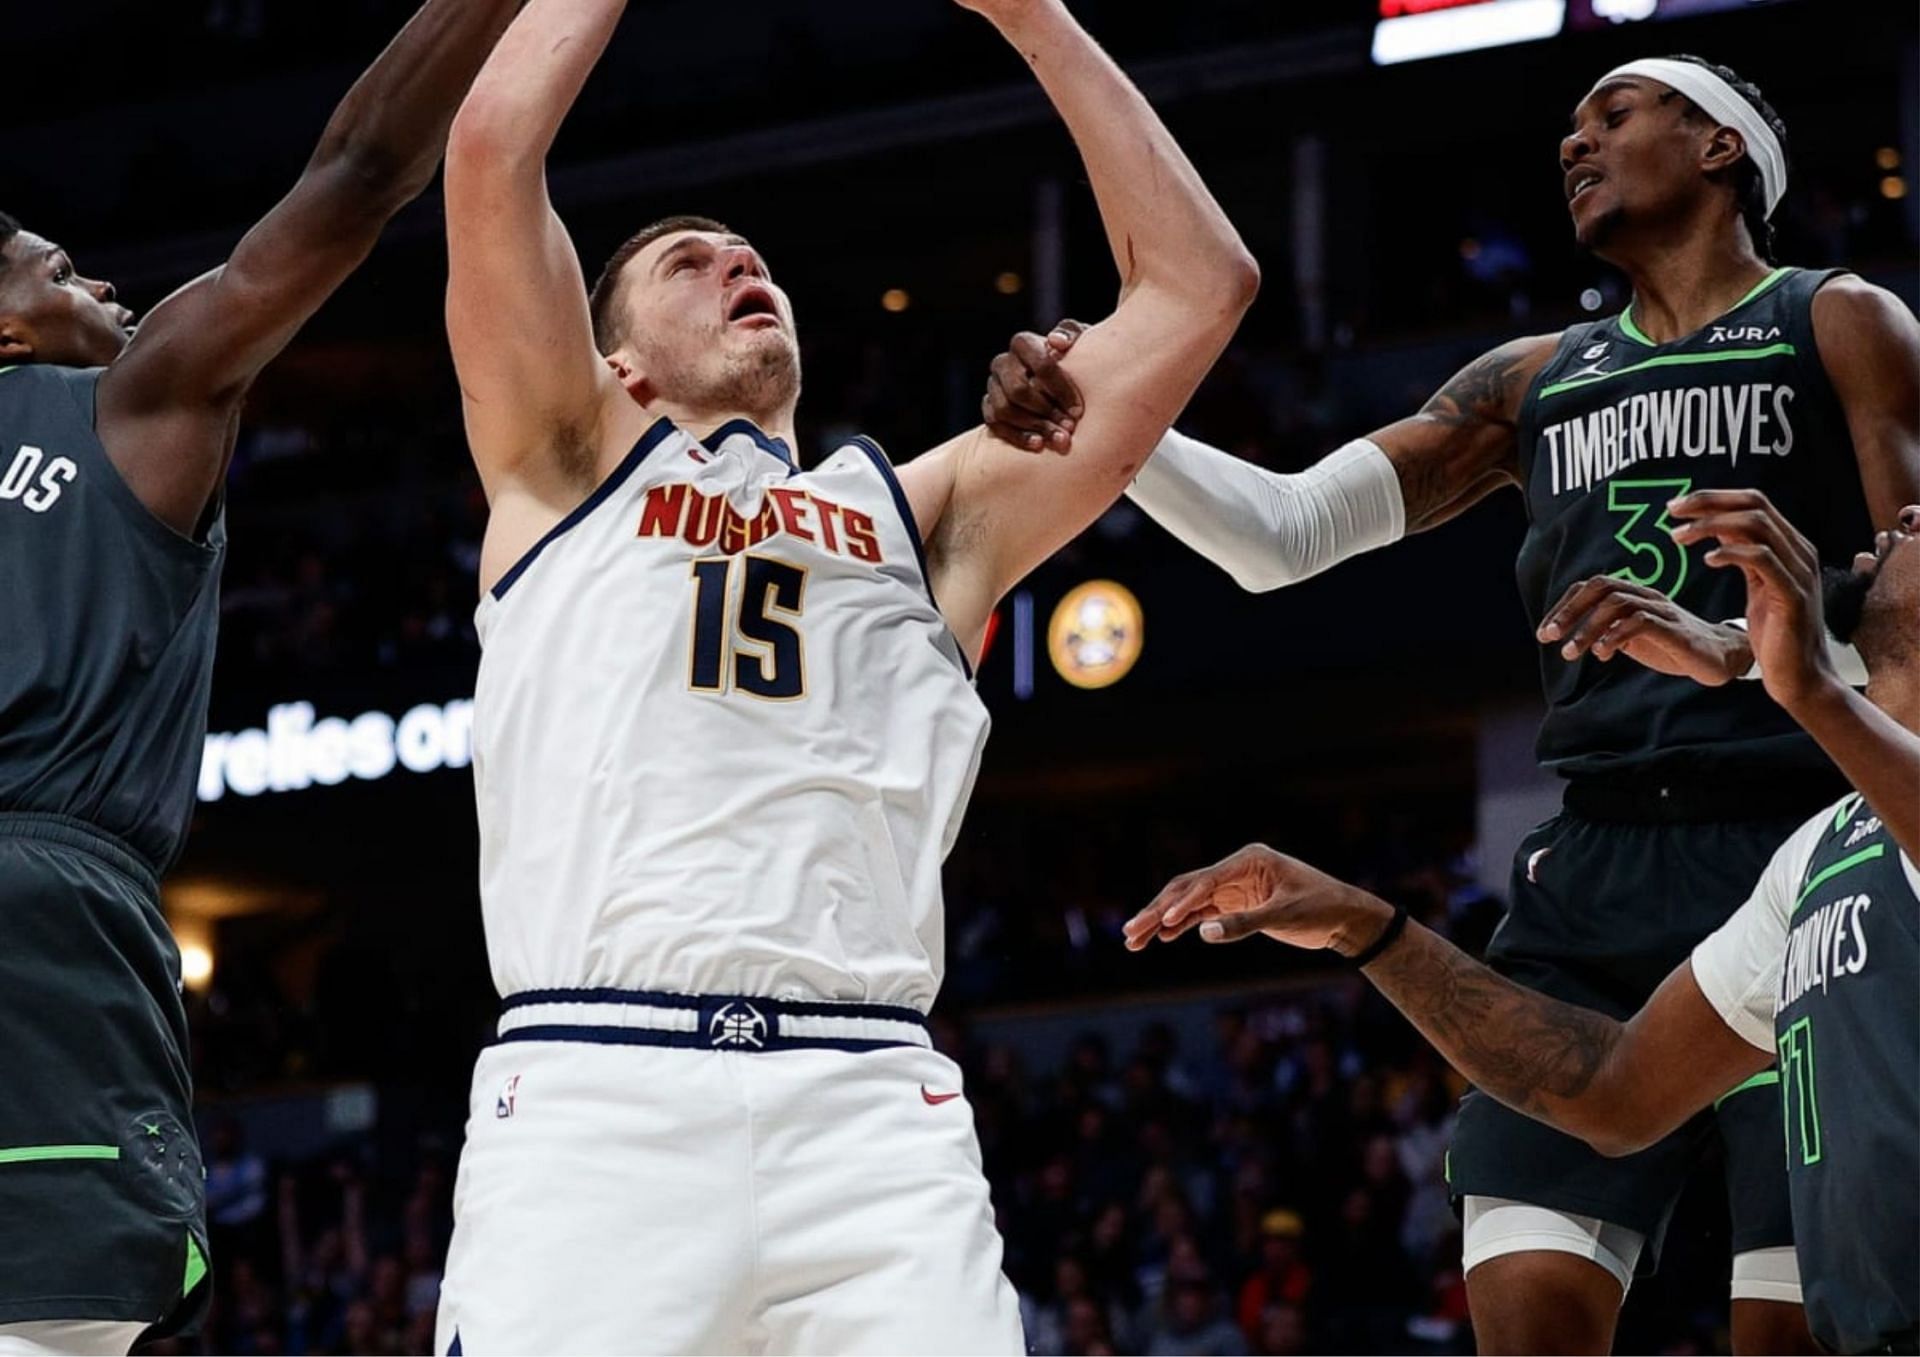 Reigning NBA MVP Nikola Jokic will lead the Denver Nuggets against the Minnesota Timberwolves in Game 1 of their first round series.